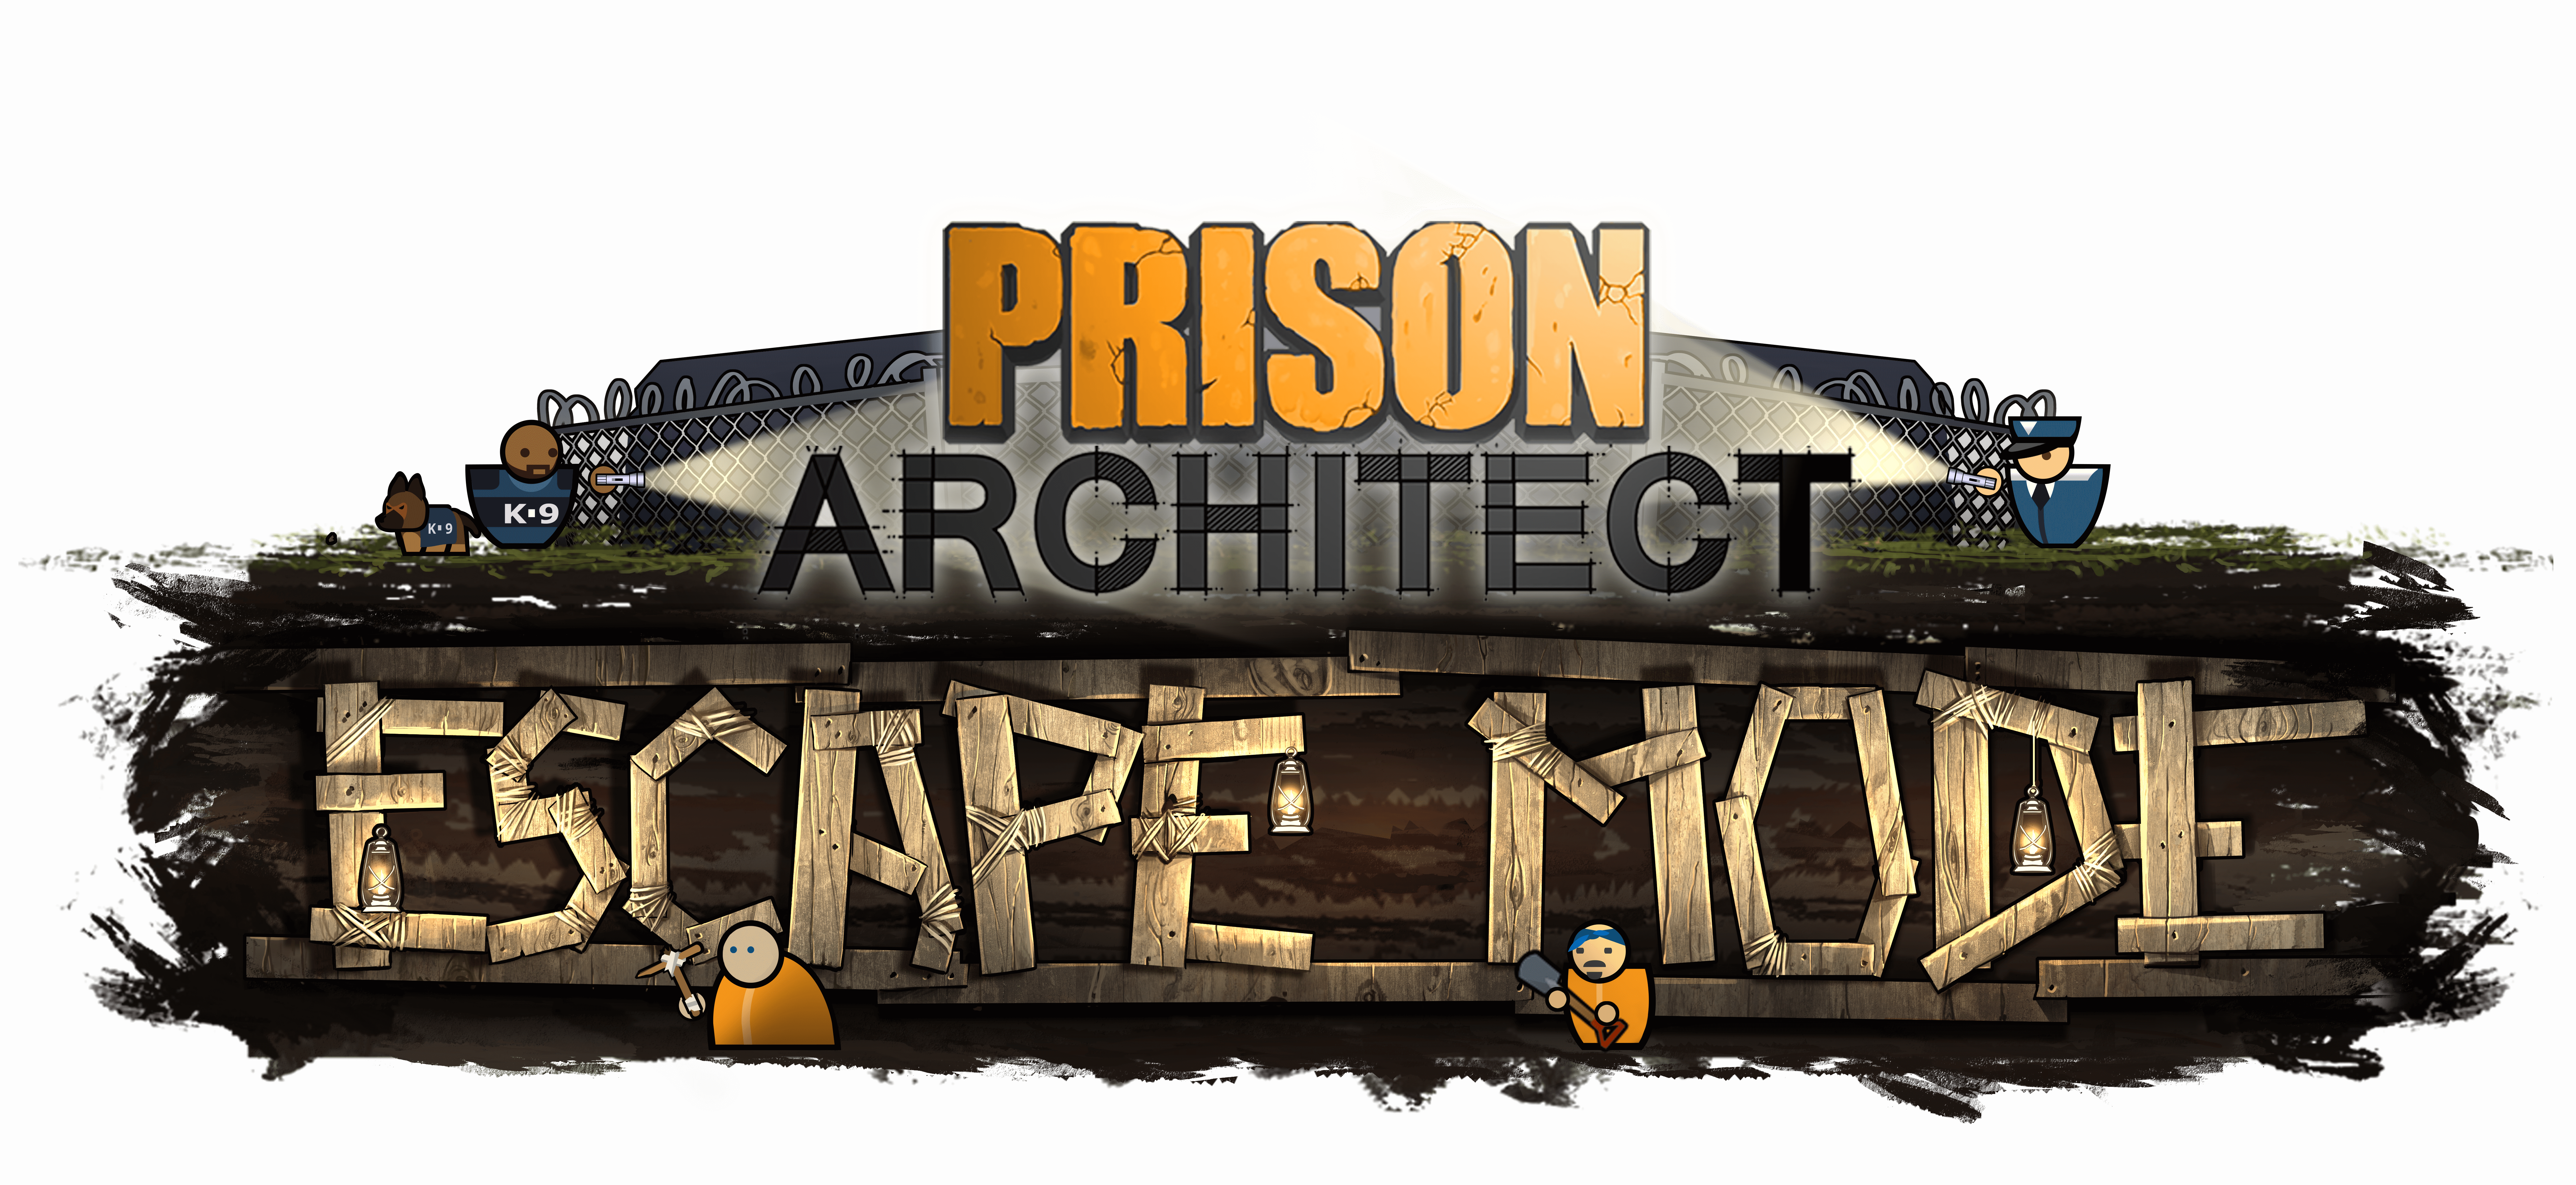 Prison Architect's Popular Escape Mode DLC Available on 4 & Launching Xbox One August 31st 👾 COSMOCOVER - The best PR agency for video games in